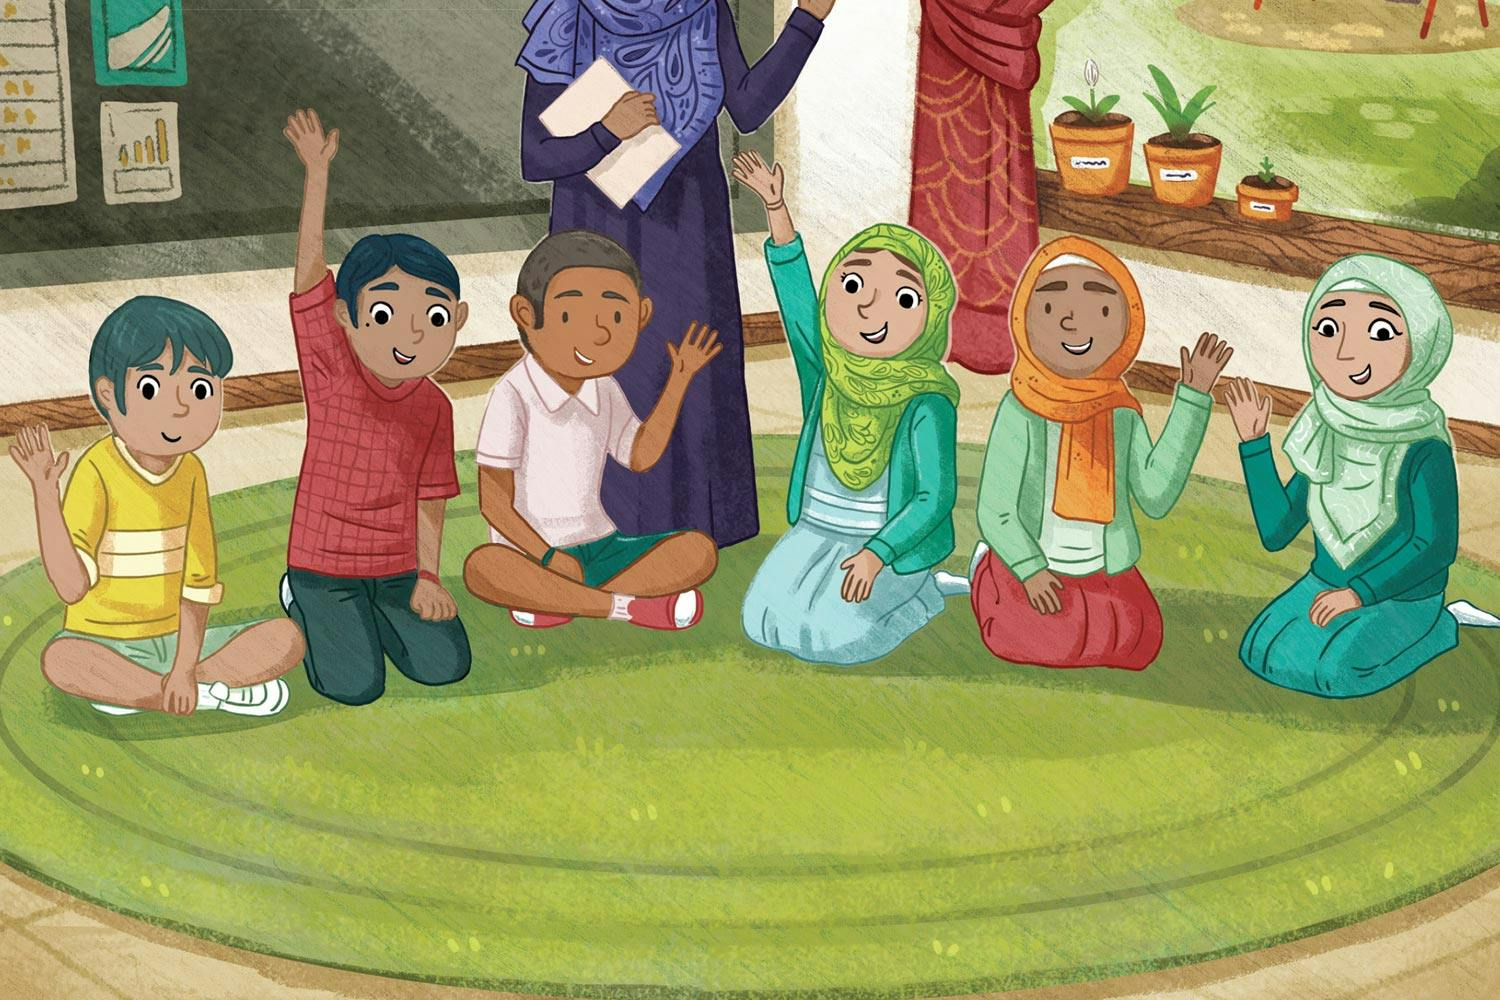 Illustration—a group of kids, some of them wearing hijabs, sit on a green rug in a classroom and wave hello.